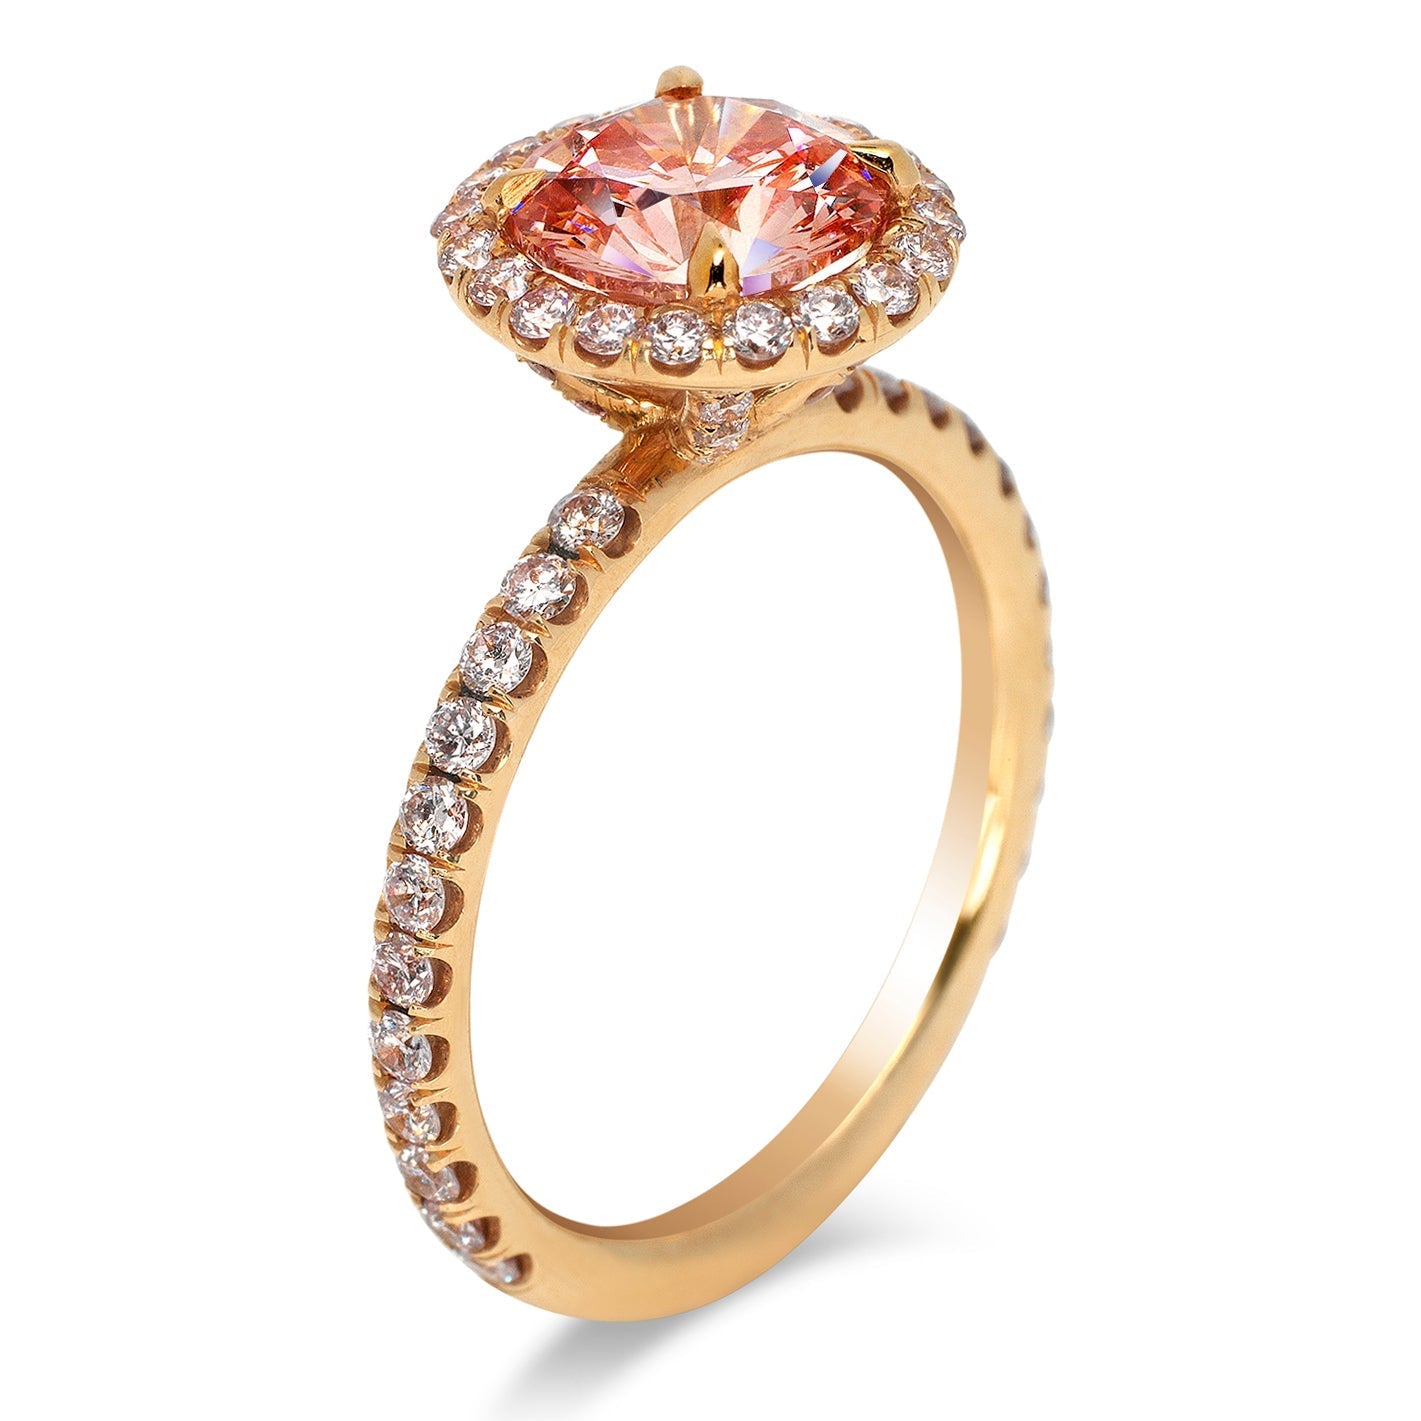 Orangy Pink Diamond Ring Round Cut 2 Carat Halo Ring in 18 K Rose Gold Side View